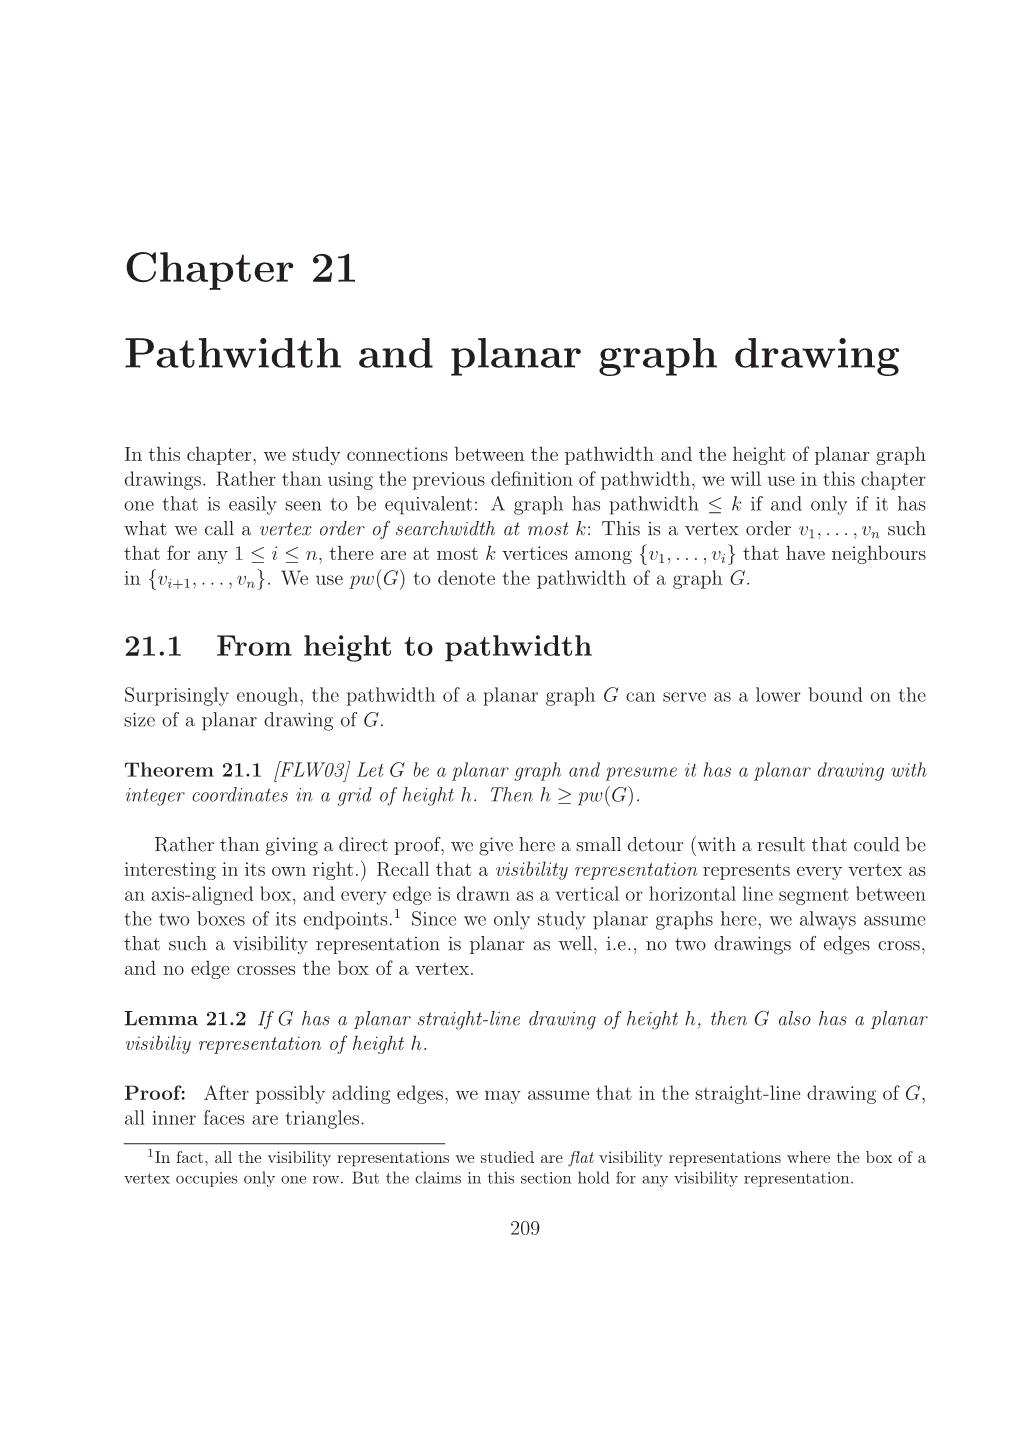 Chapter 21 Pathwidth and Planar Graph Drawing